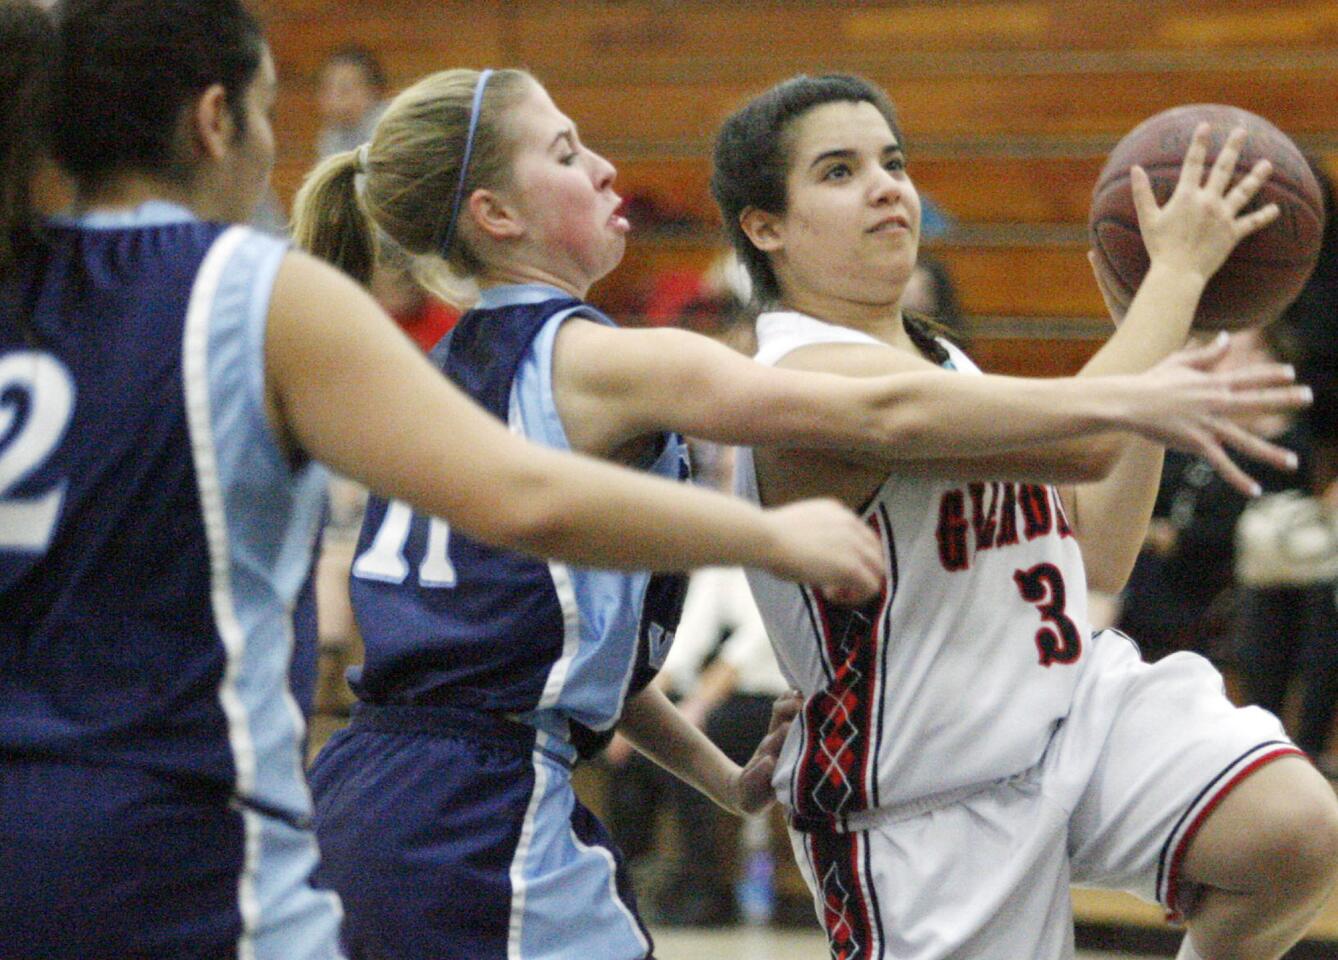 Glendale's Amanda Mazanians, right, goes for a shot while CV's Jacqueline Wilson defends Mazanians during a game at Glendale High School l in Glendale on Tuesday, January 22, 2013.